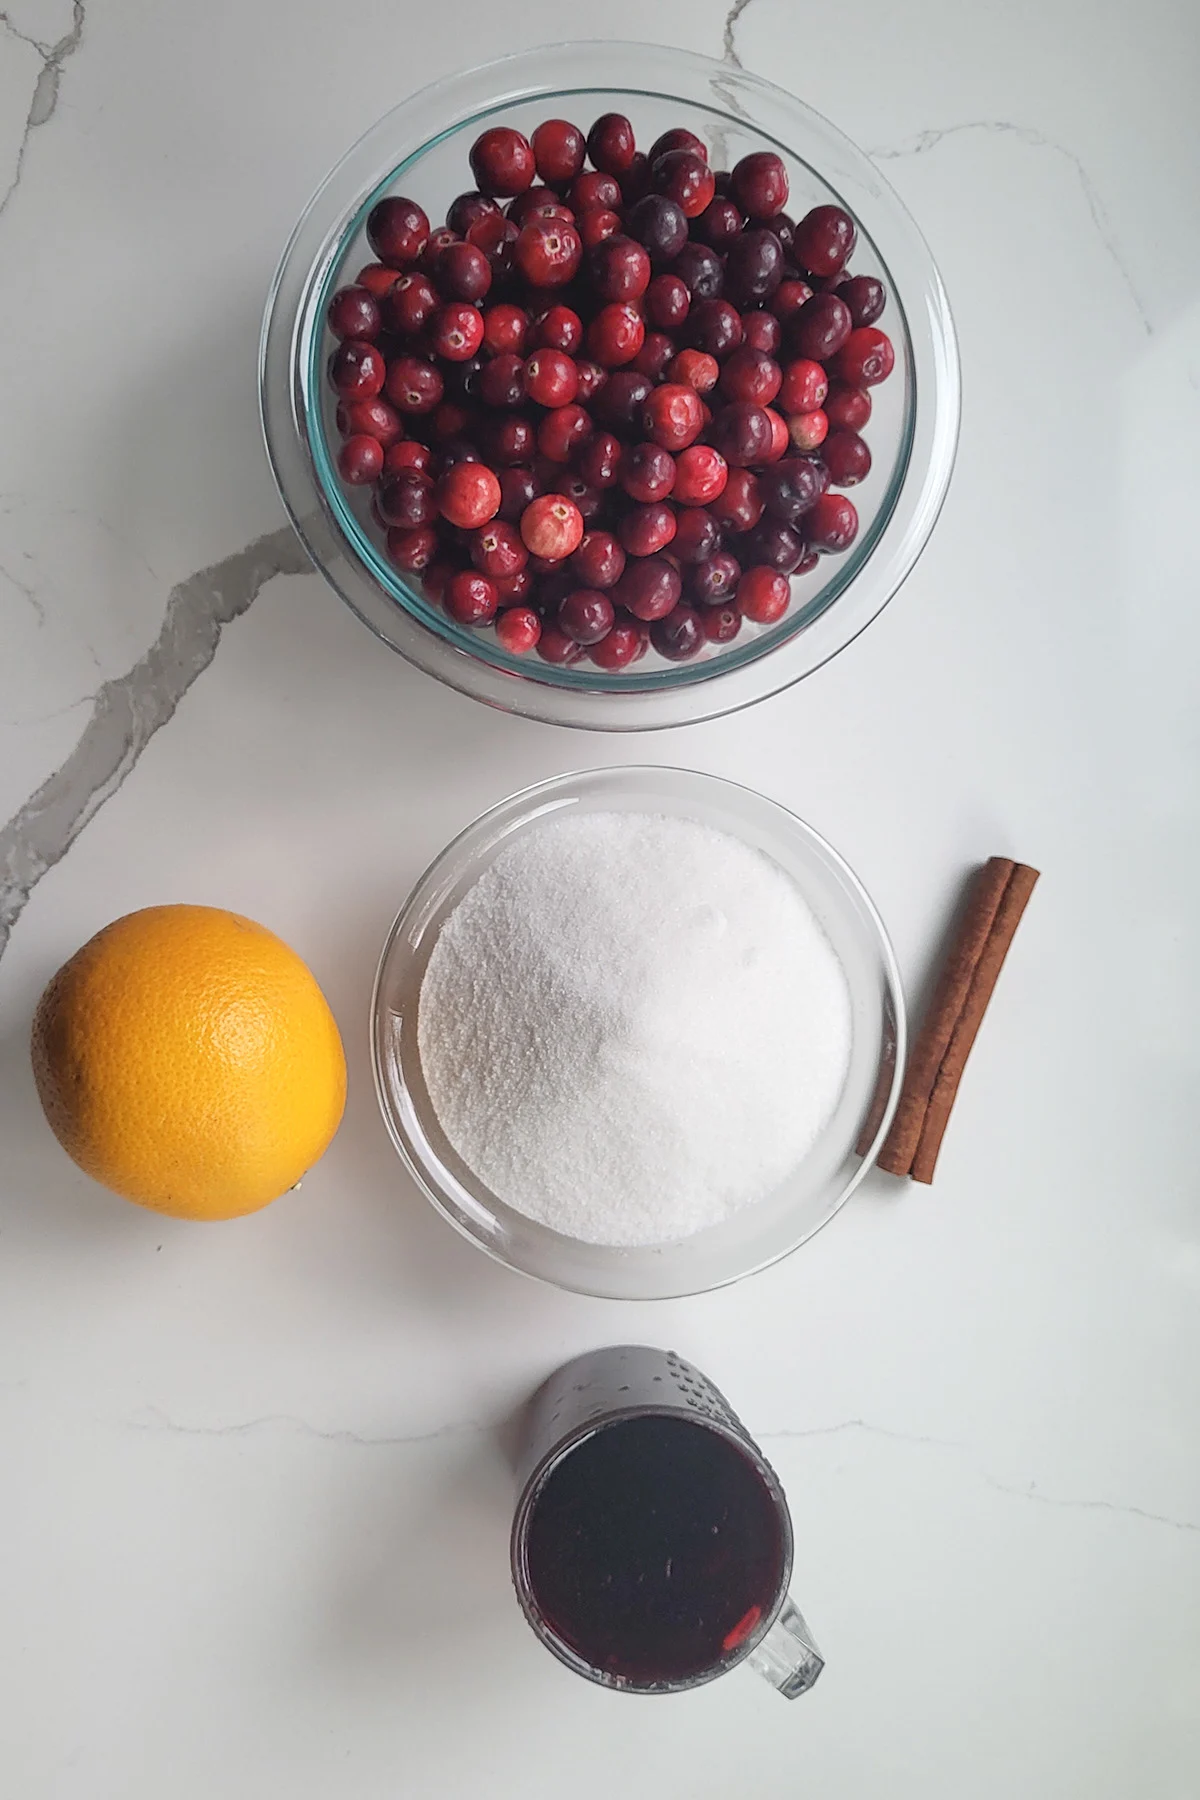 ingredients for cranberry compote in glass bowls on a white surface.